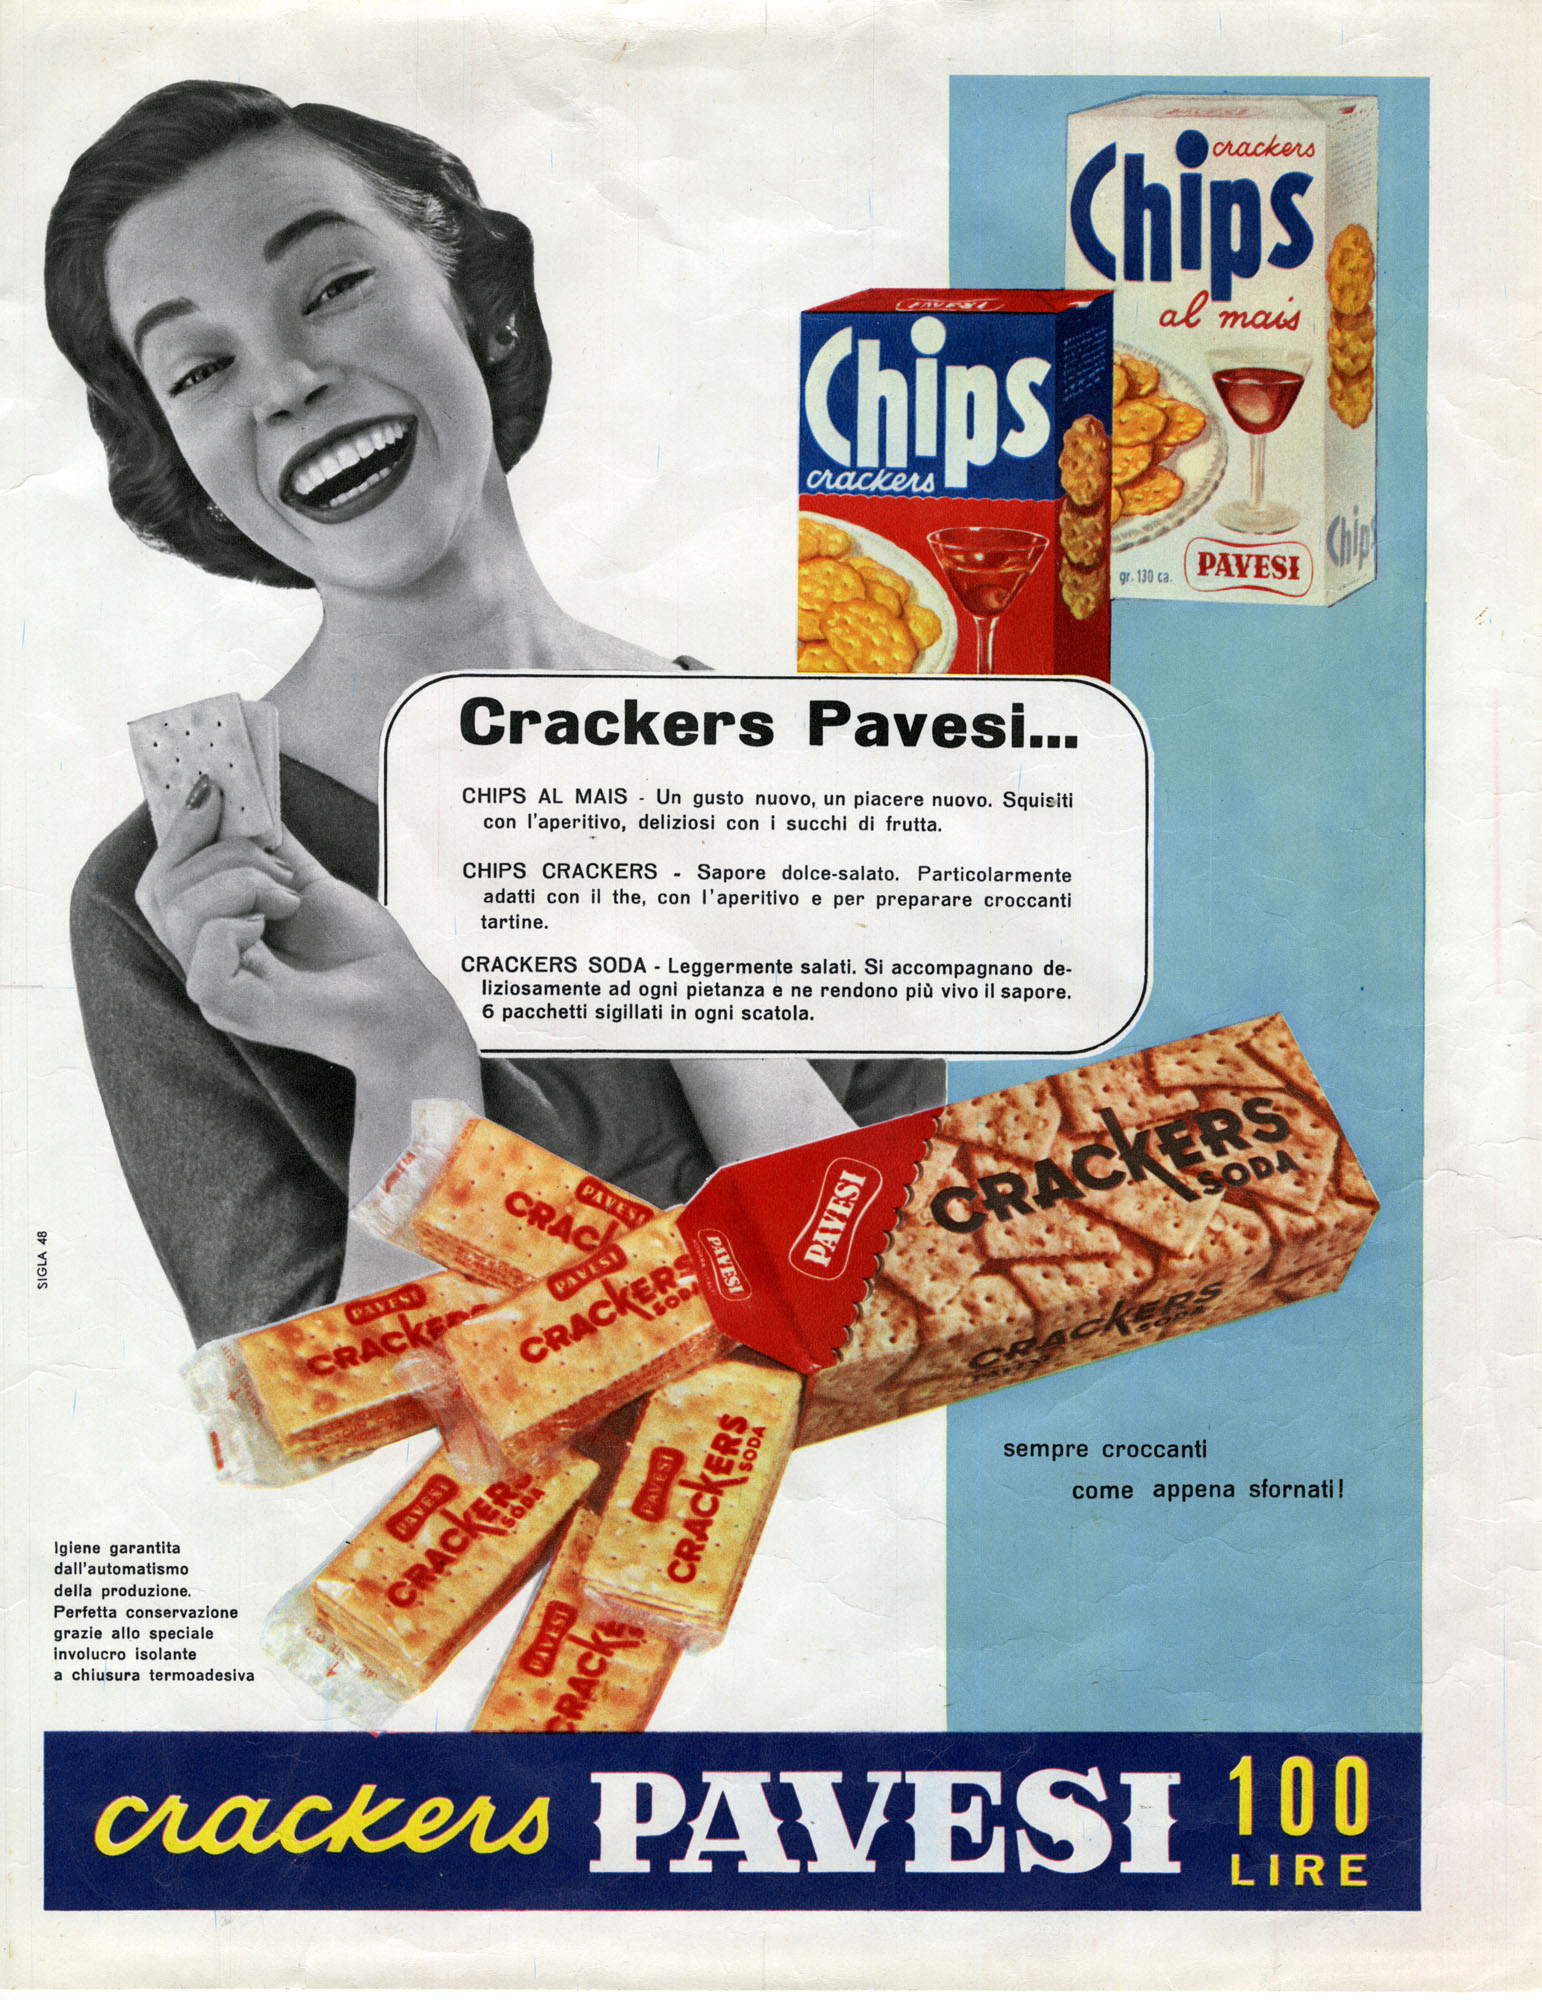 The first Soda Crackers and Pavesi Chips advertising in 1955